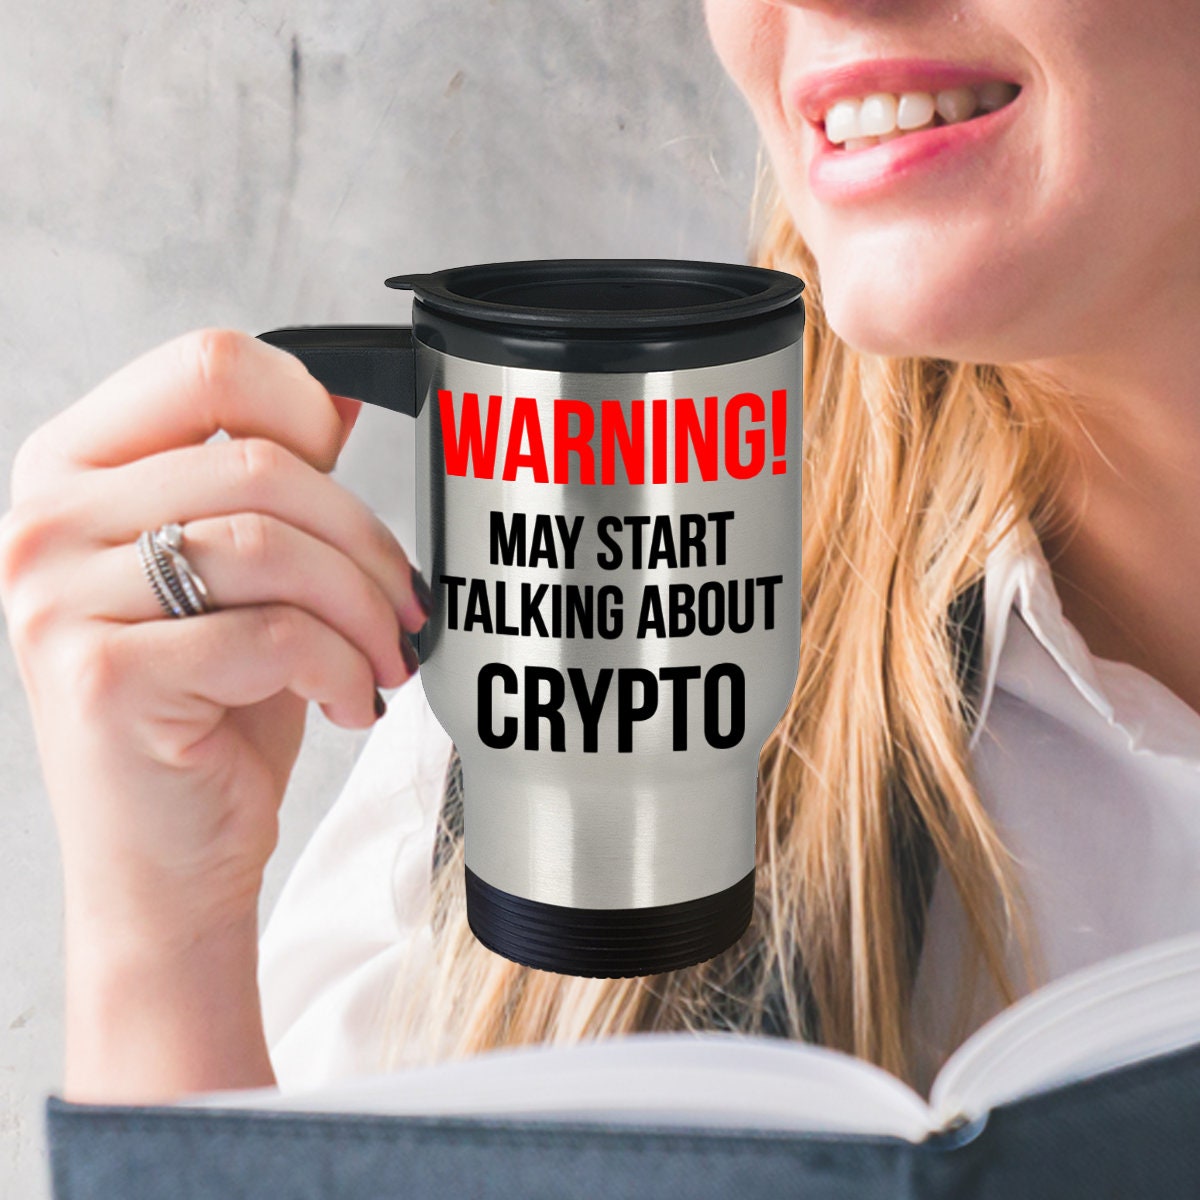 best crypto gifts